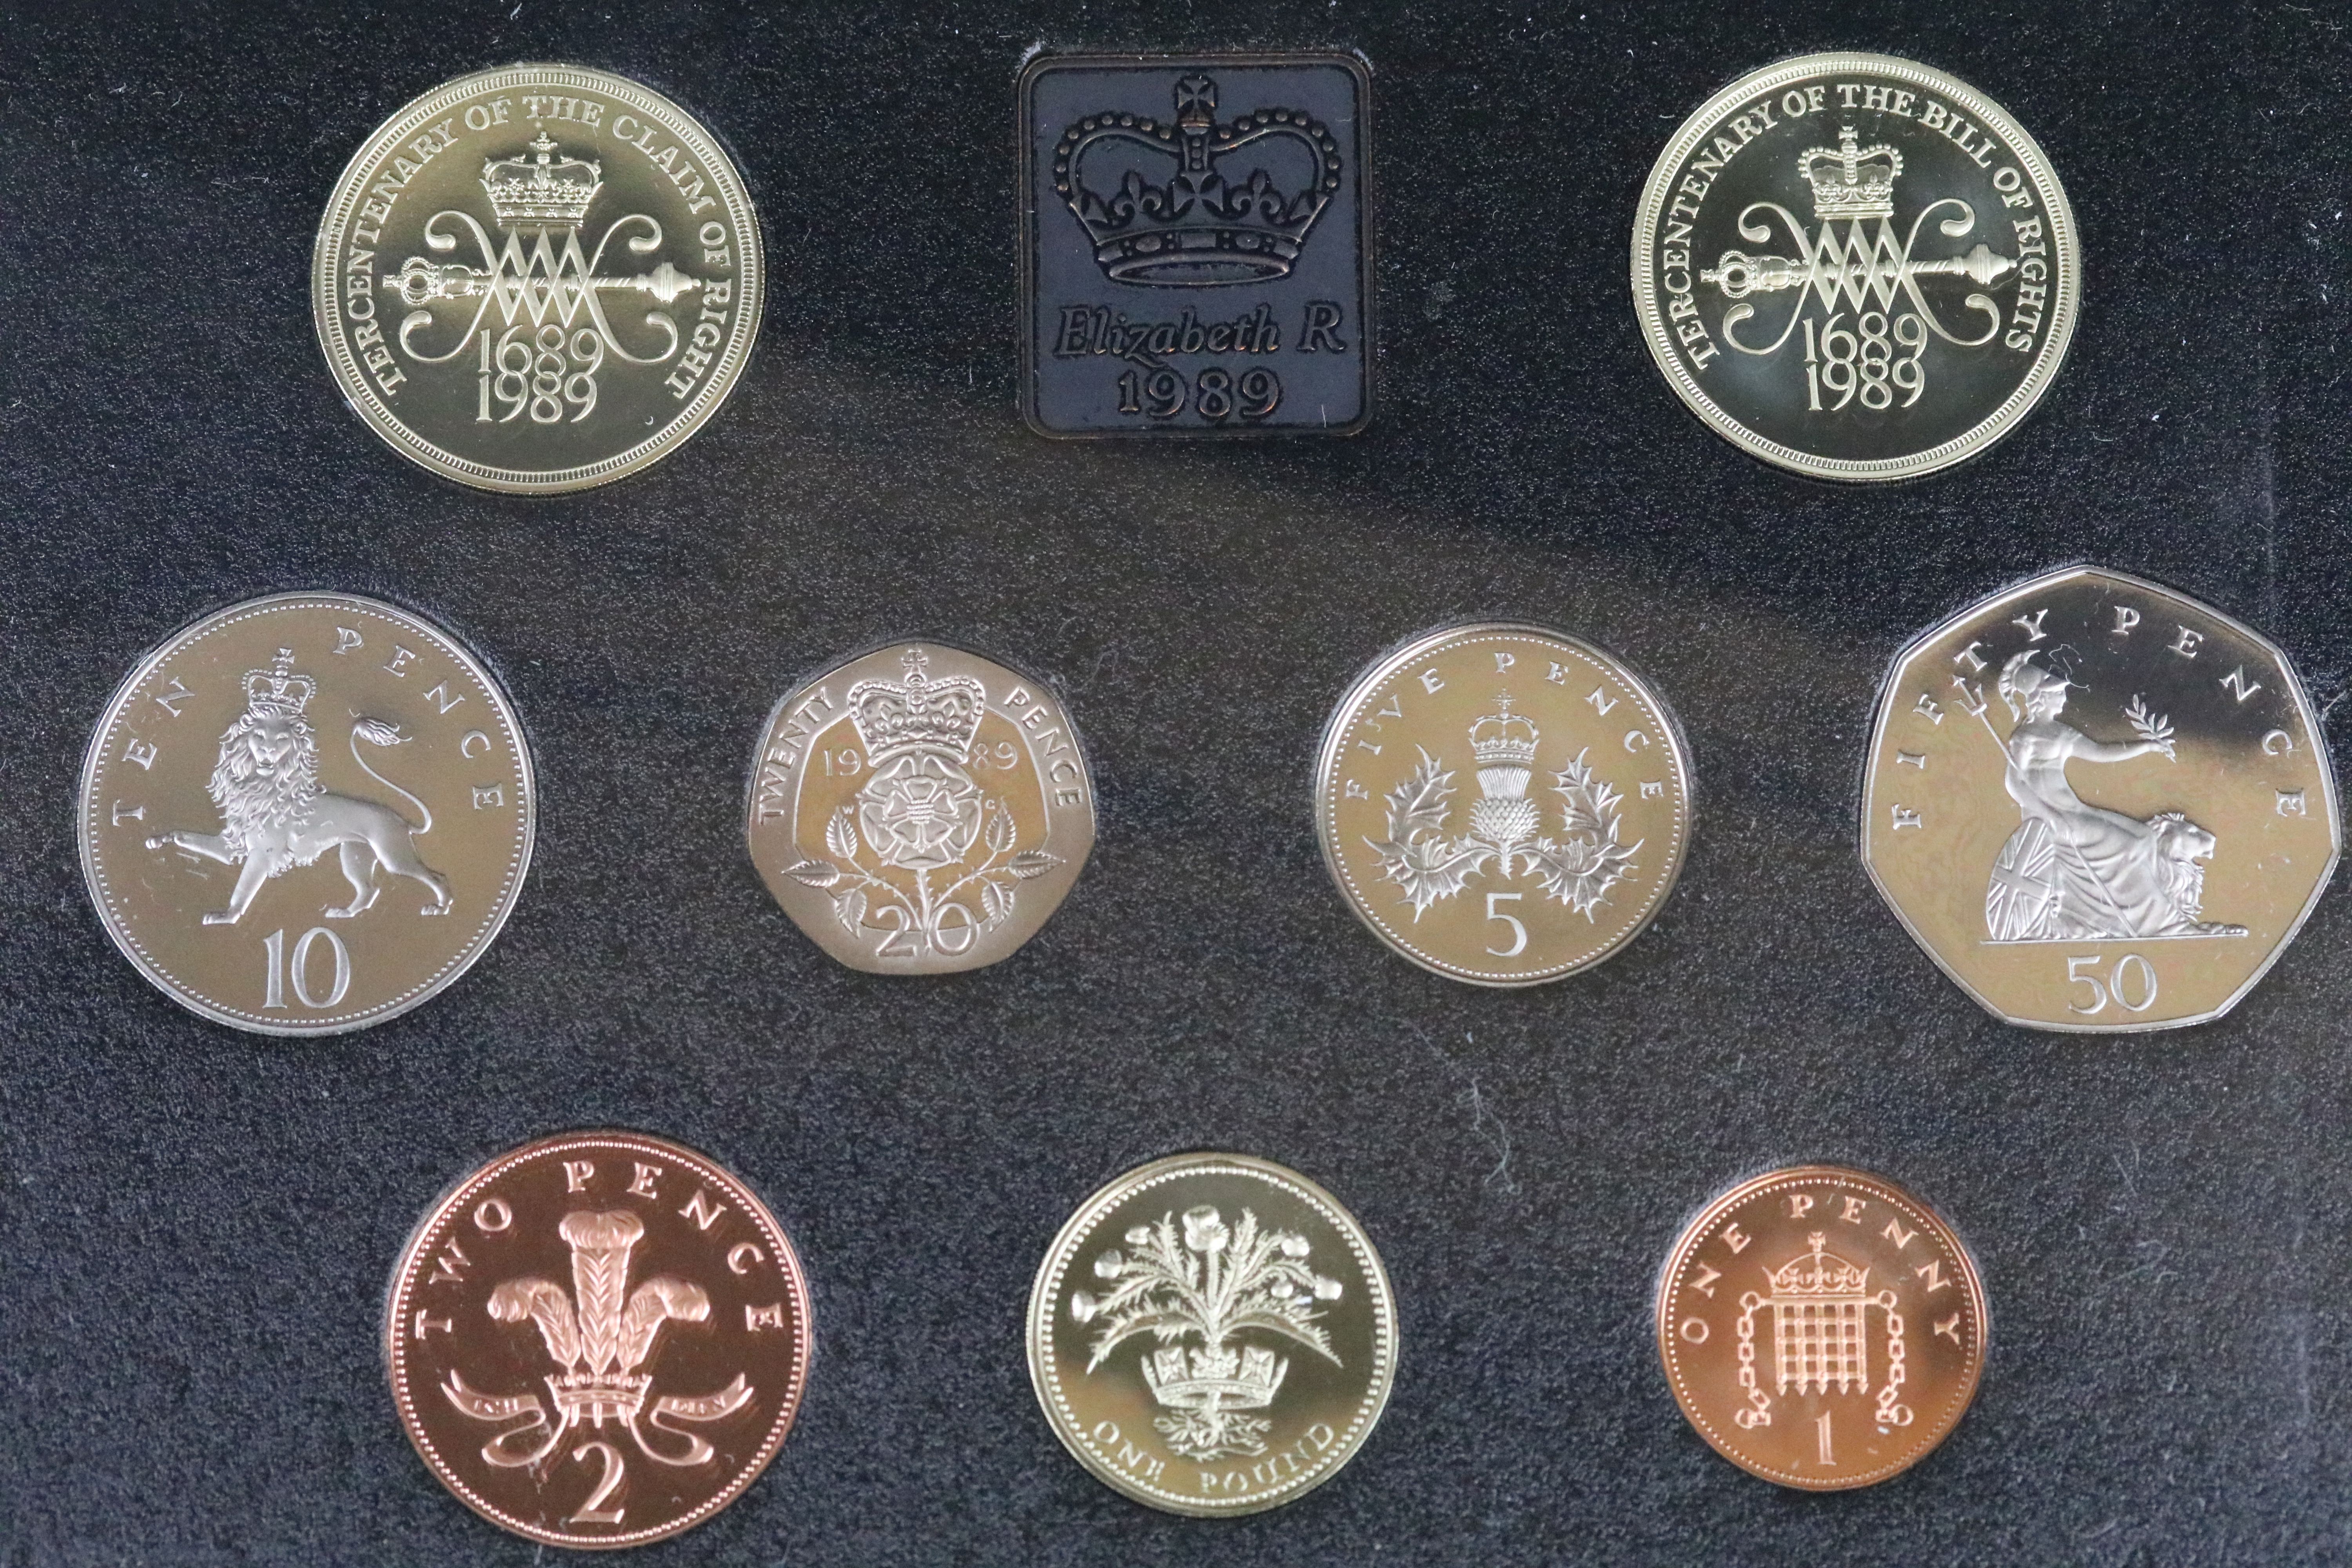 A collection of eight United Kingdom Royal Mint proof year sets to include 1992, 1998, 1989, 1988, - Image 9 of 9